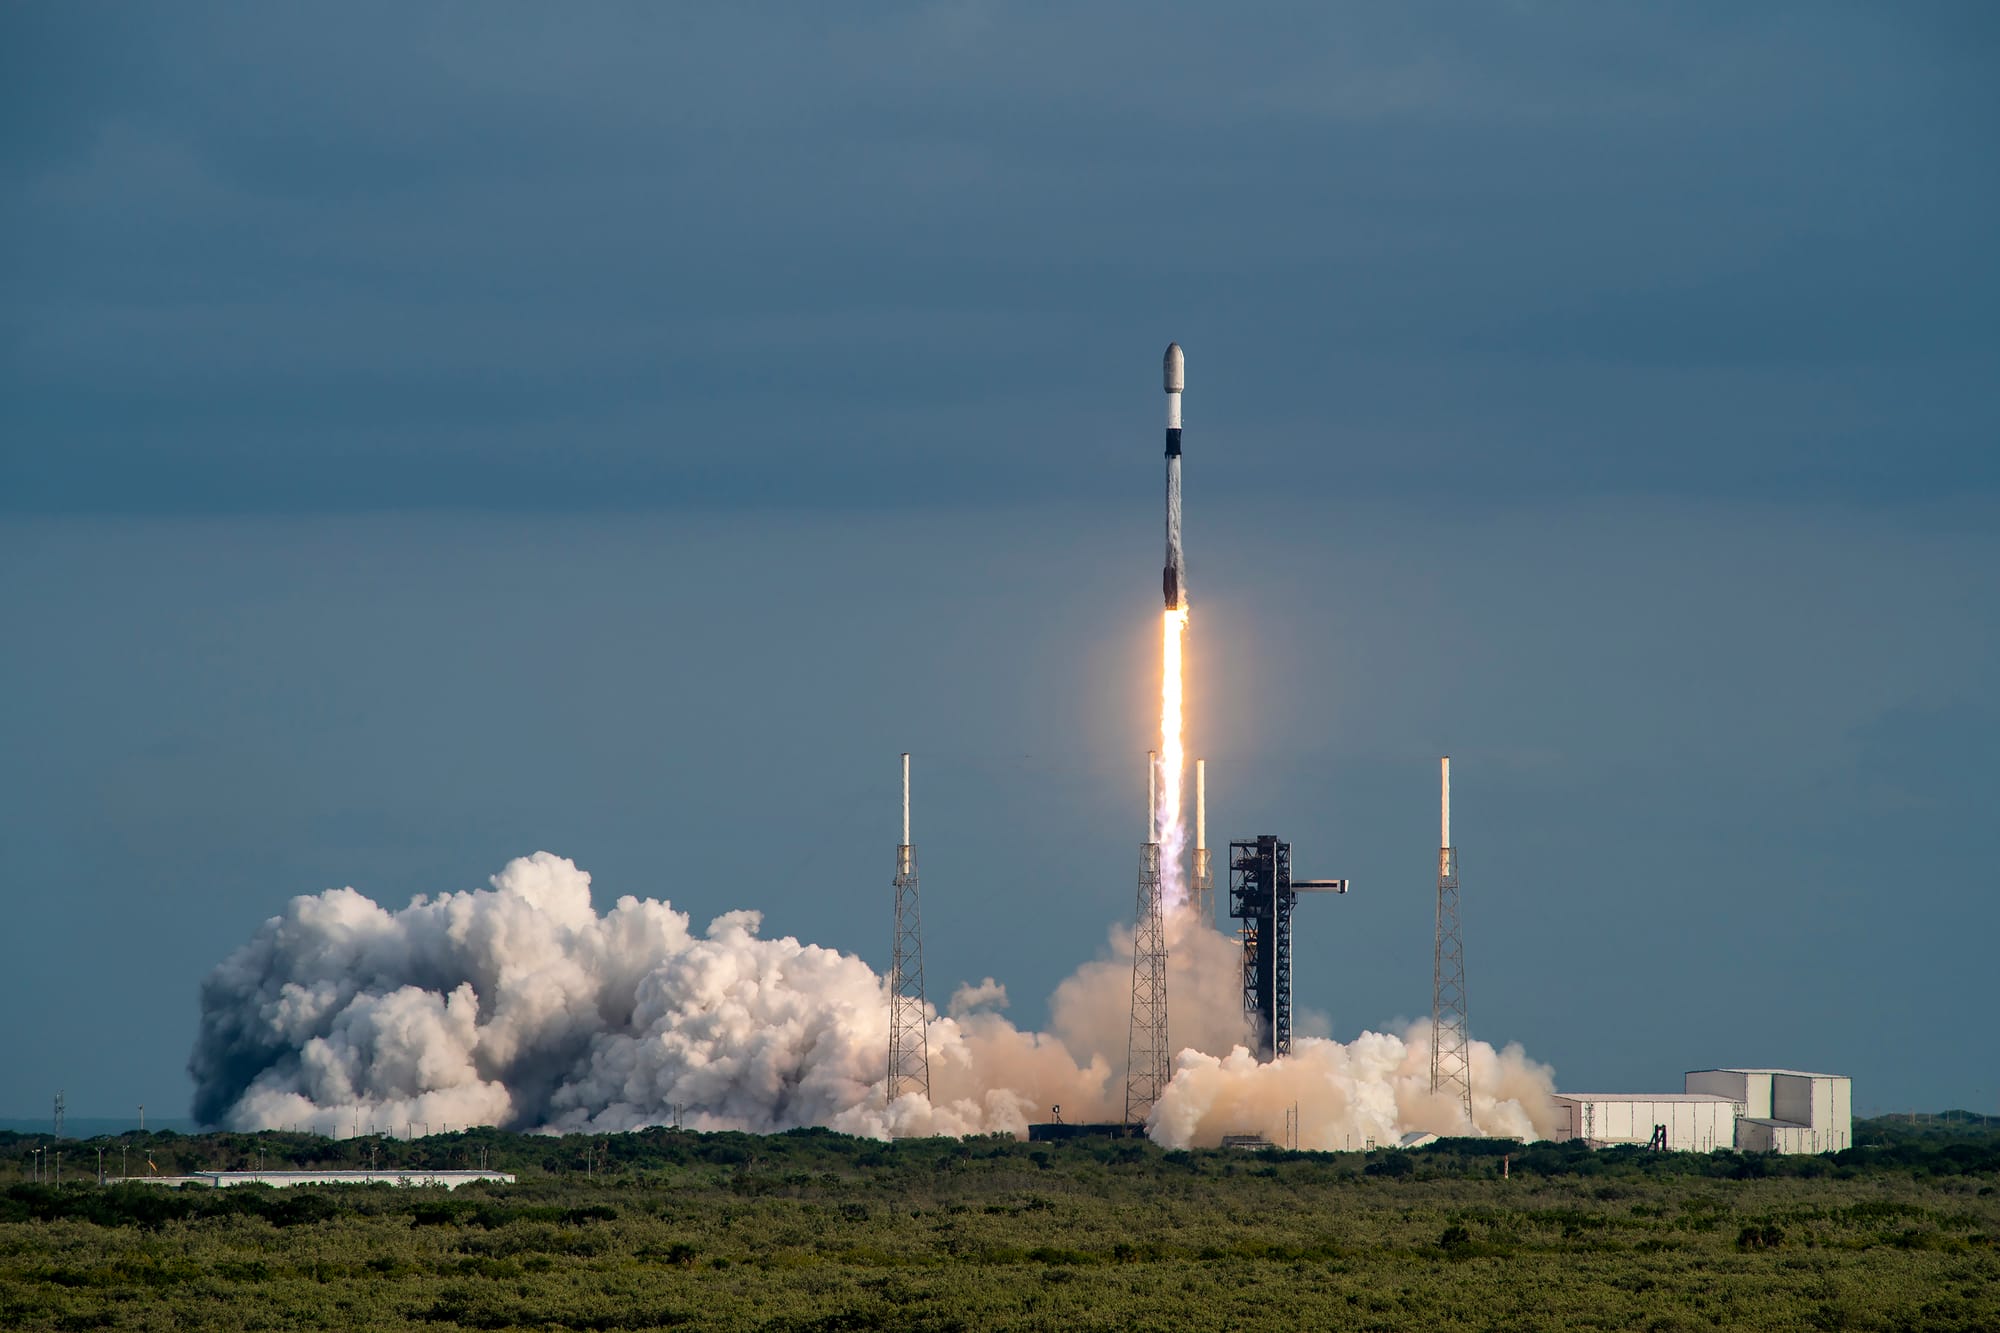 Falcon 9 lifting off from Space Launch Complex 40 for Starlink Group 6-53. ©SpaceX